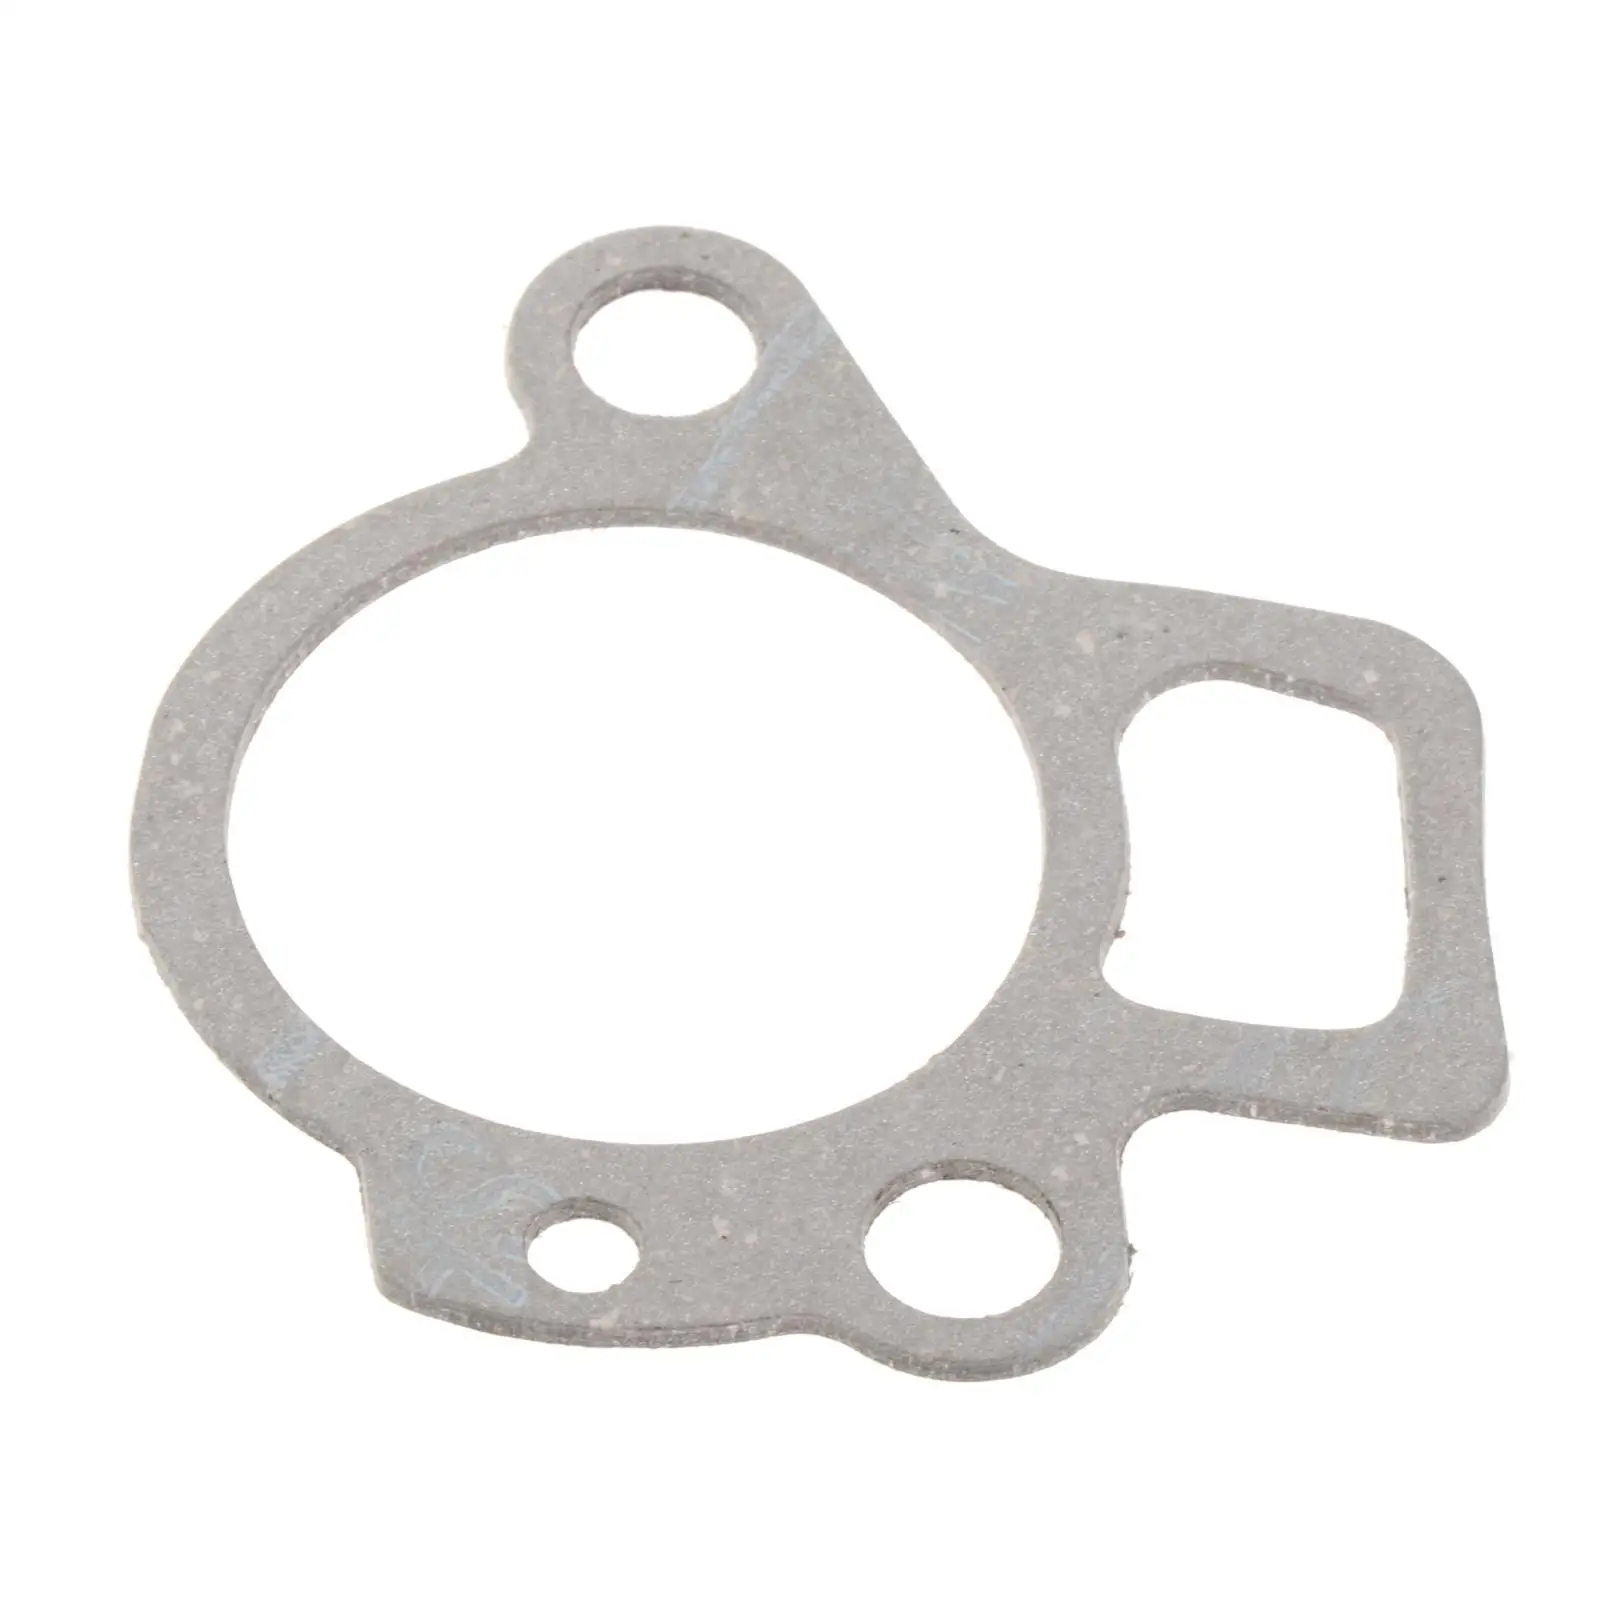 Thermostat Gasket 541-25 27-824853 6H3-12414-A1 Fit for Yamaha Outboard Engine 9.9-70 HP Replaces Accessories High Performance